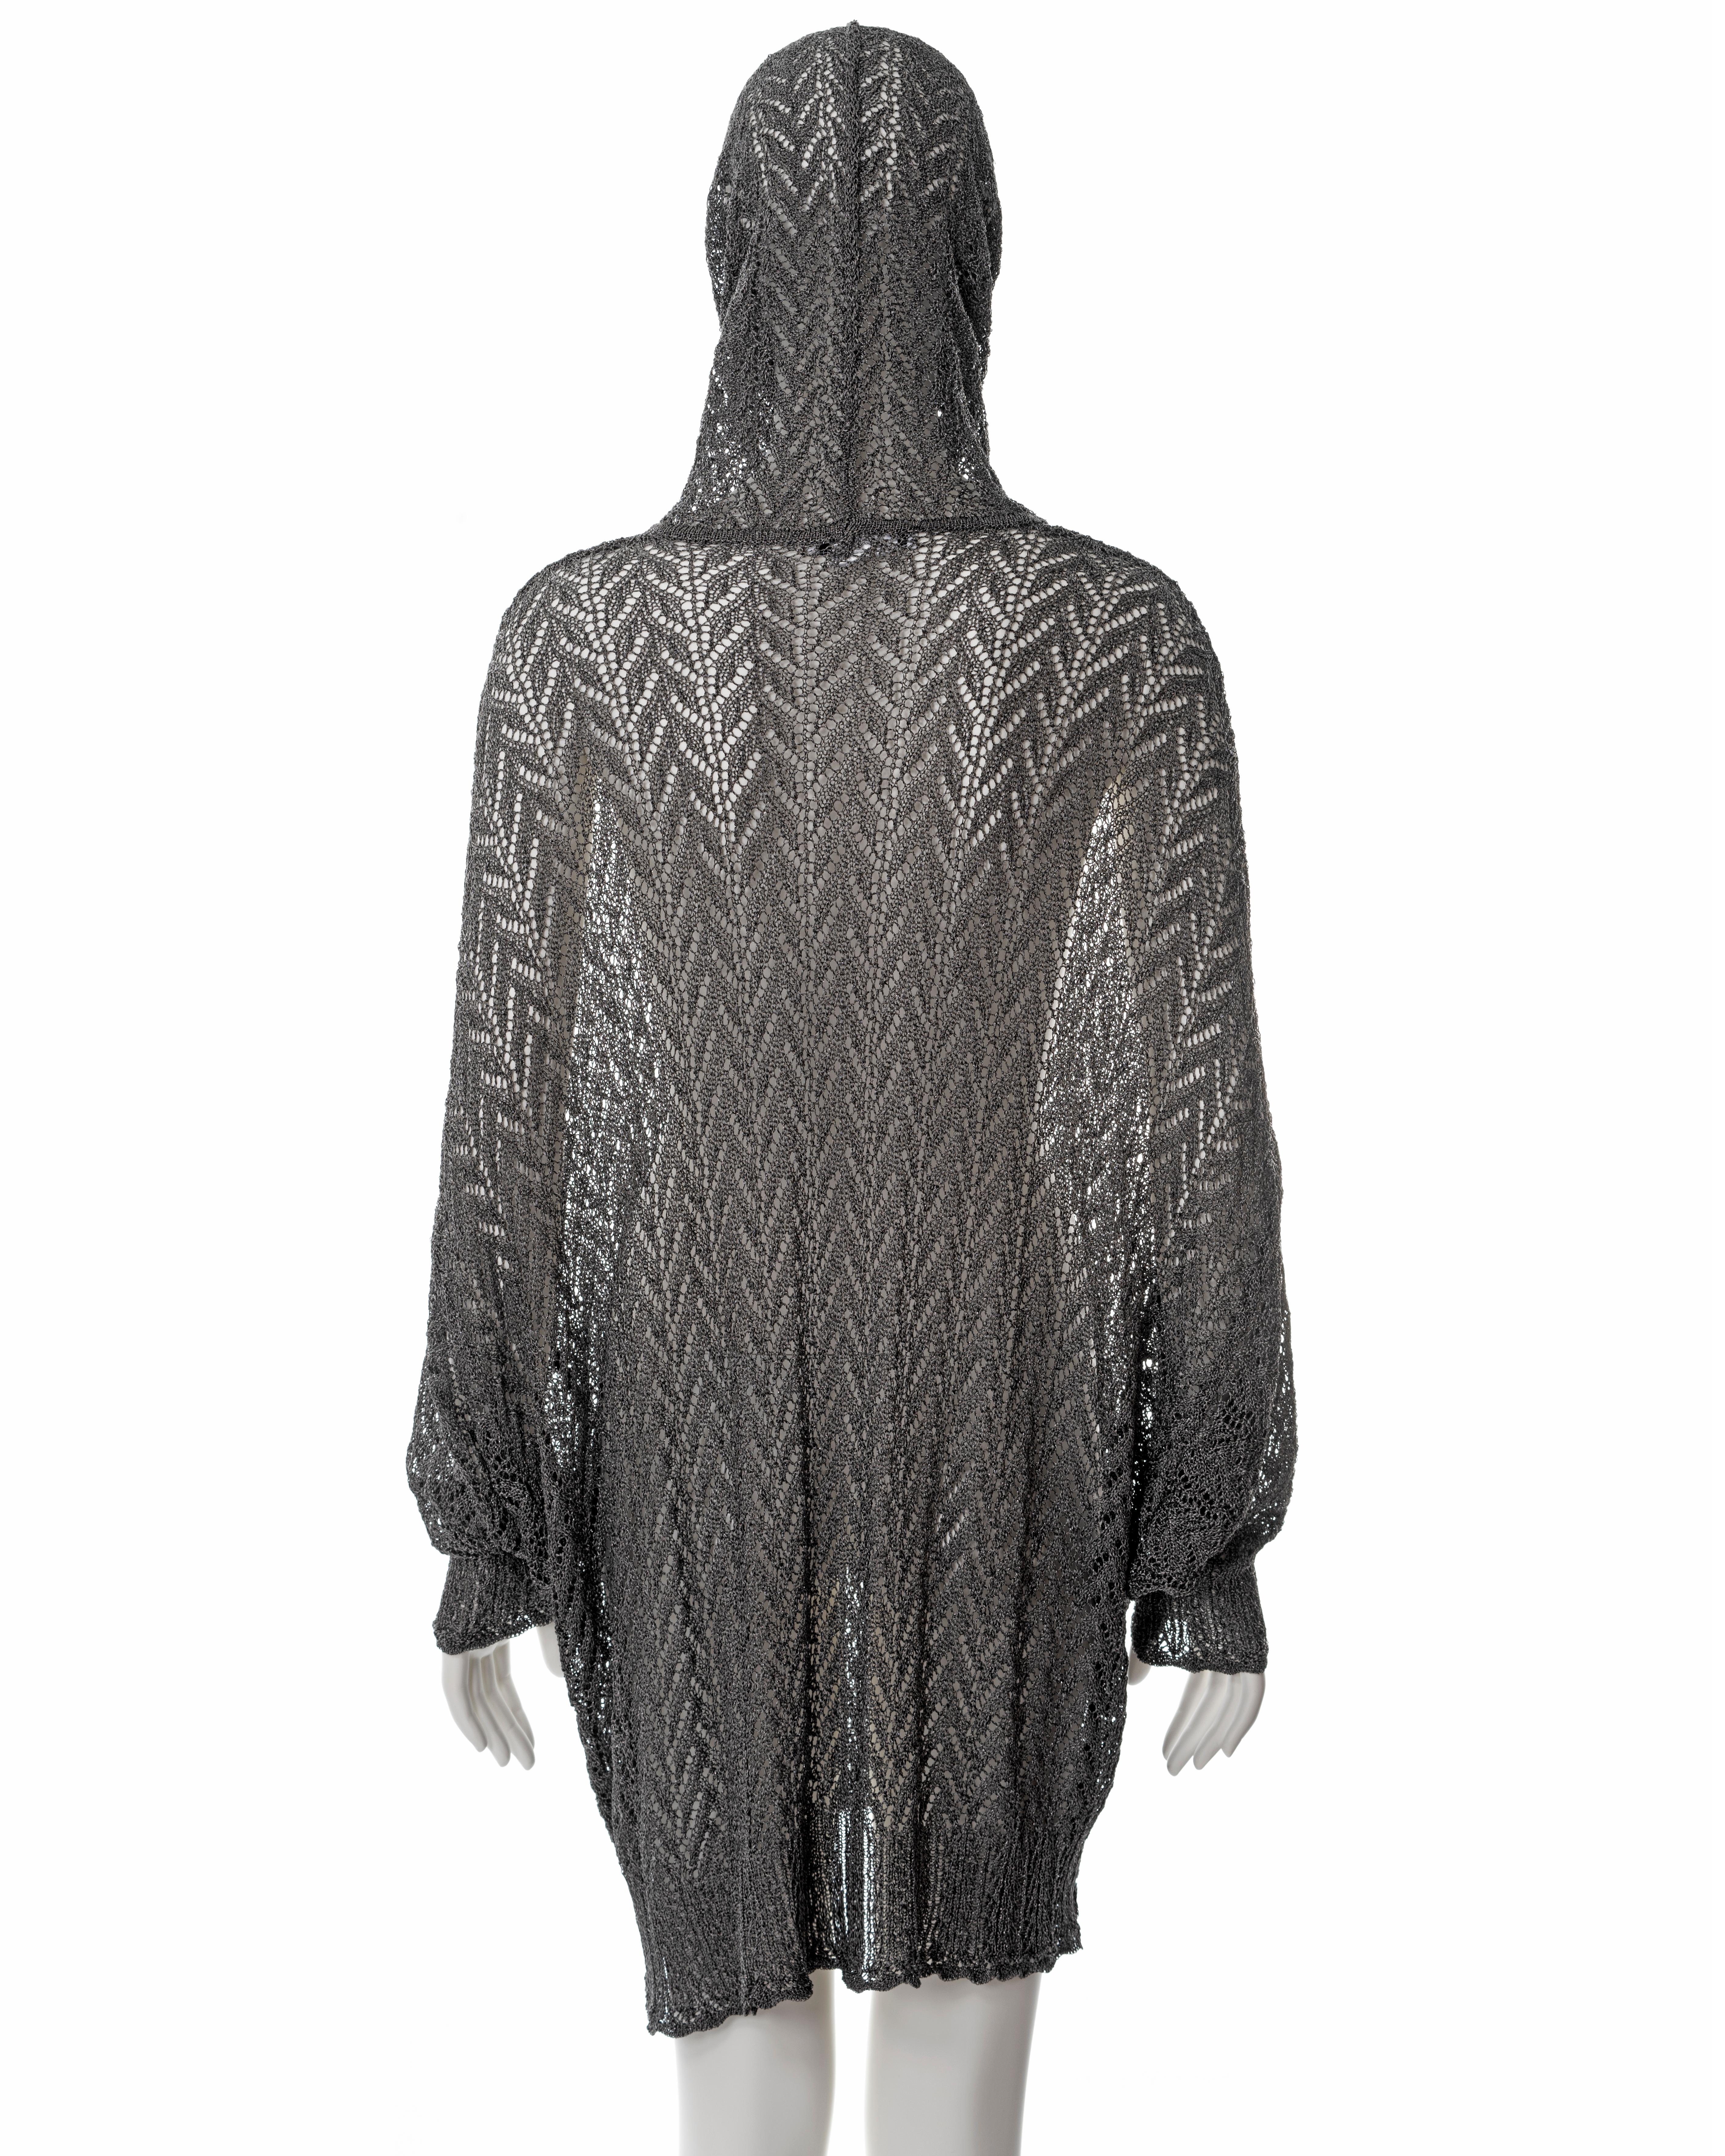 Christian Dior by John Galliano silver crochet sweater dress, fw 1998 For Sale 3